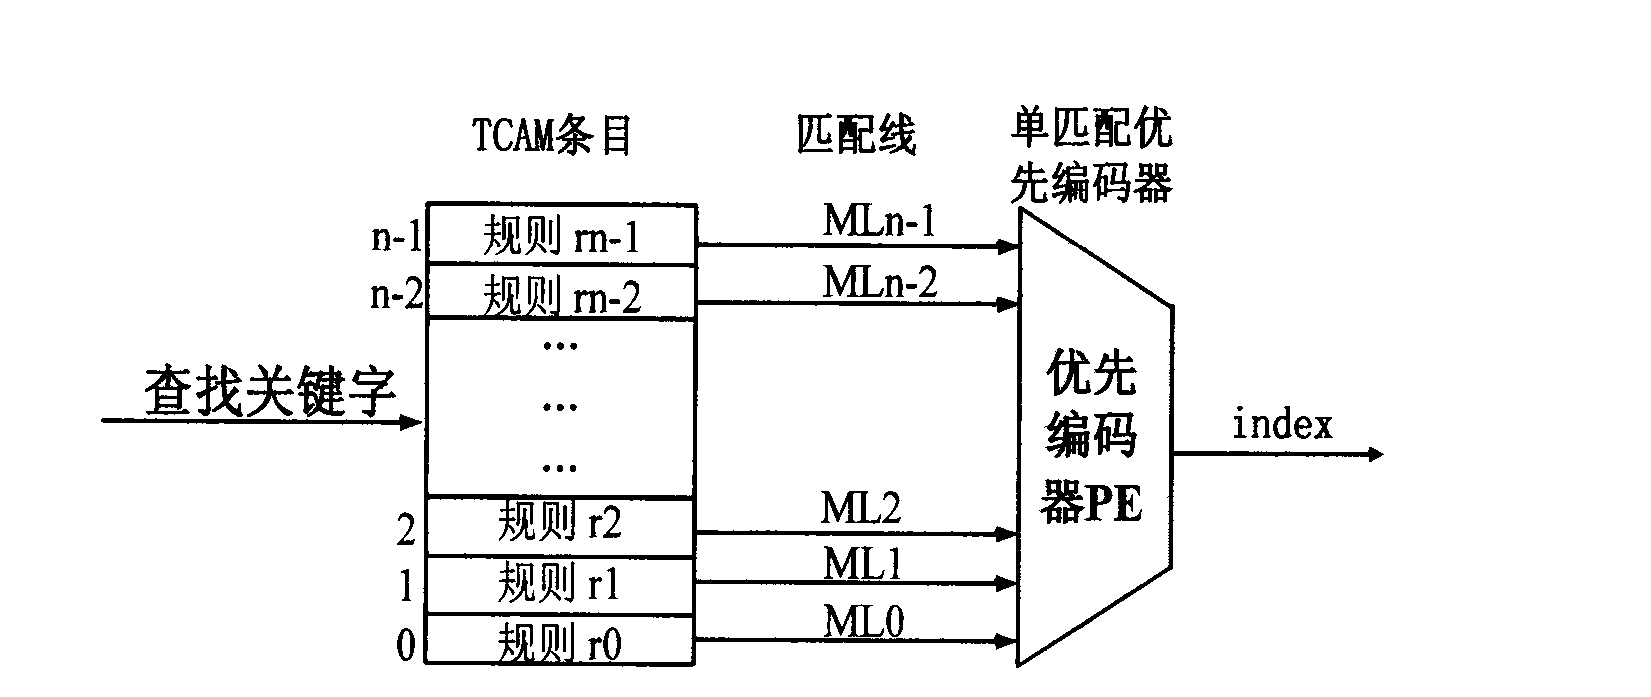 Multi-match 2-level hierarchical search method for ranges on basis of TCAM (ternary content addressable memory)